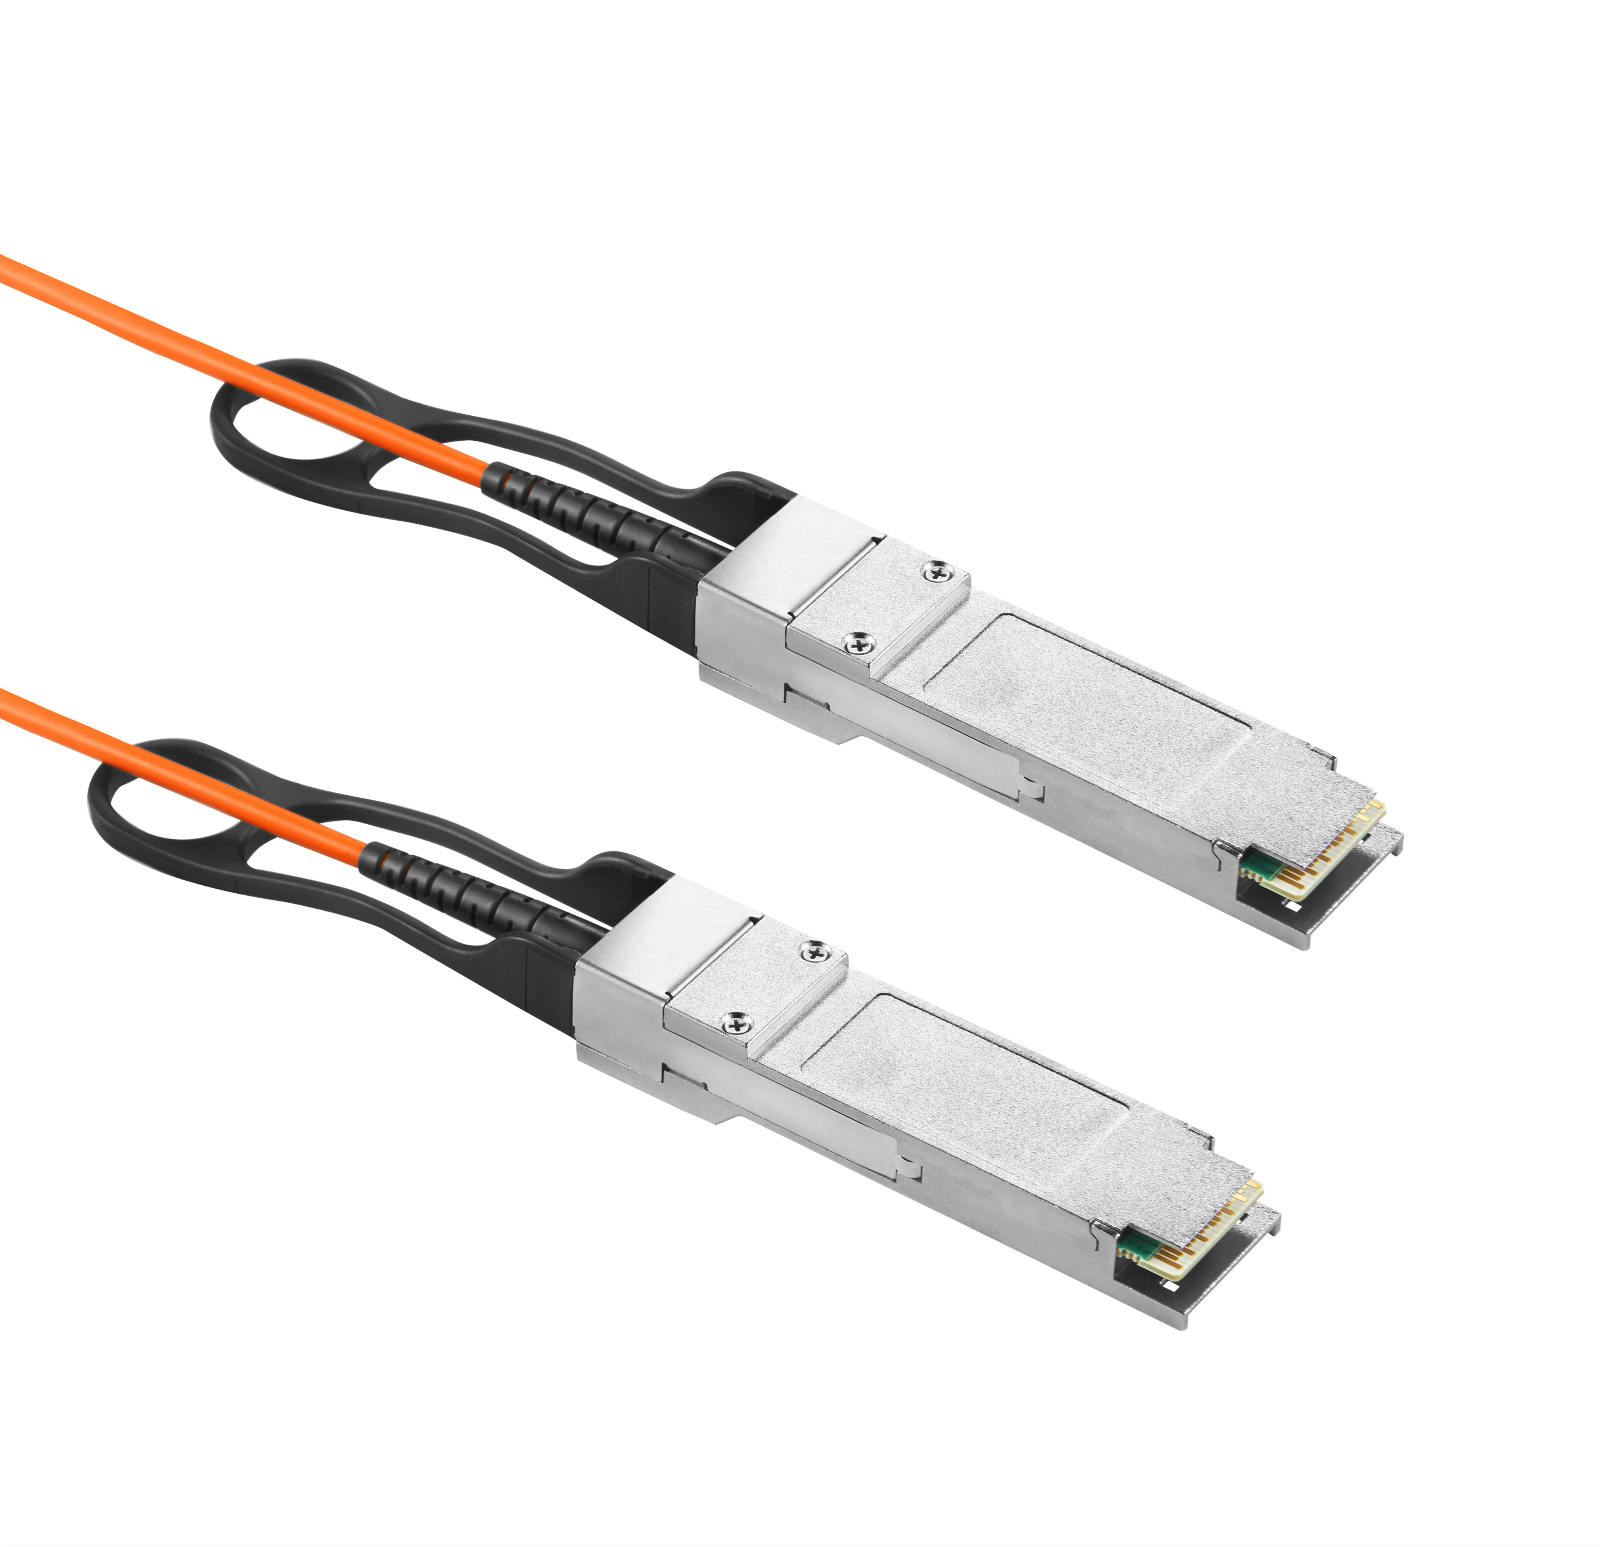 AOC  Cableof HTD-Infor, more professional more satisfied an